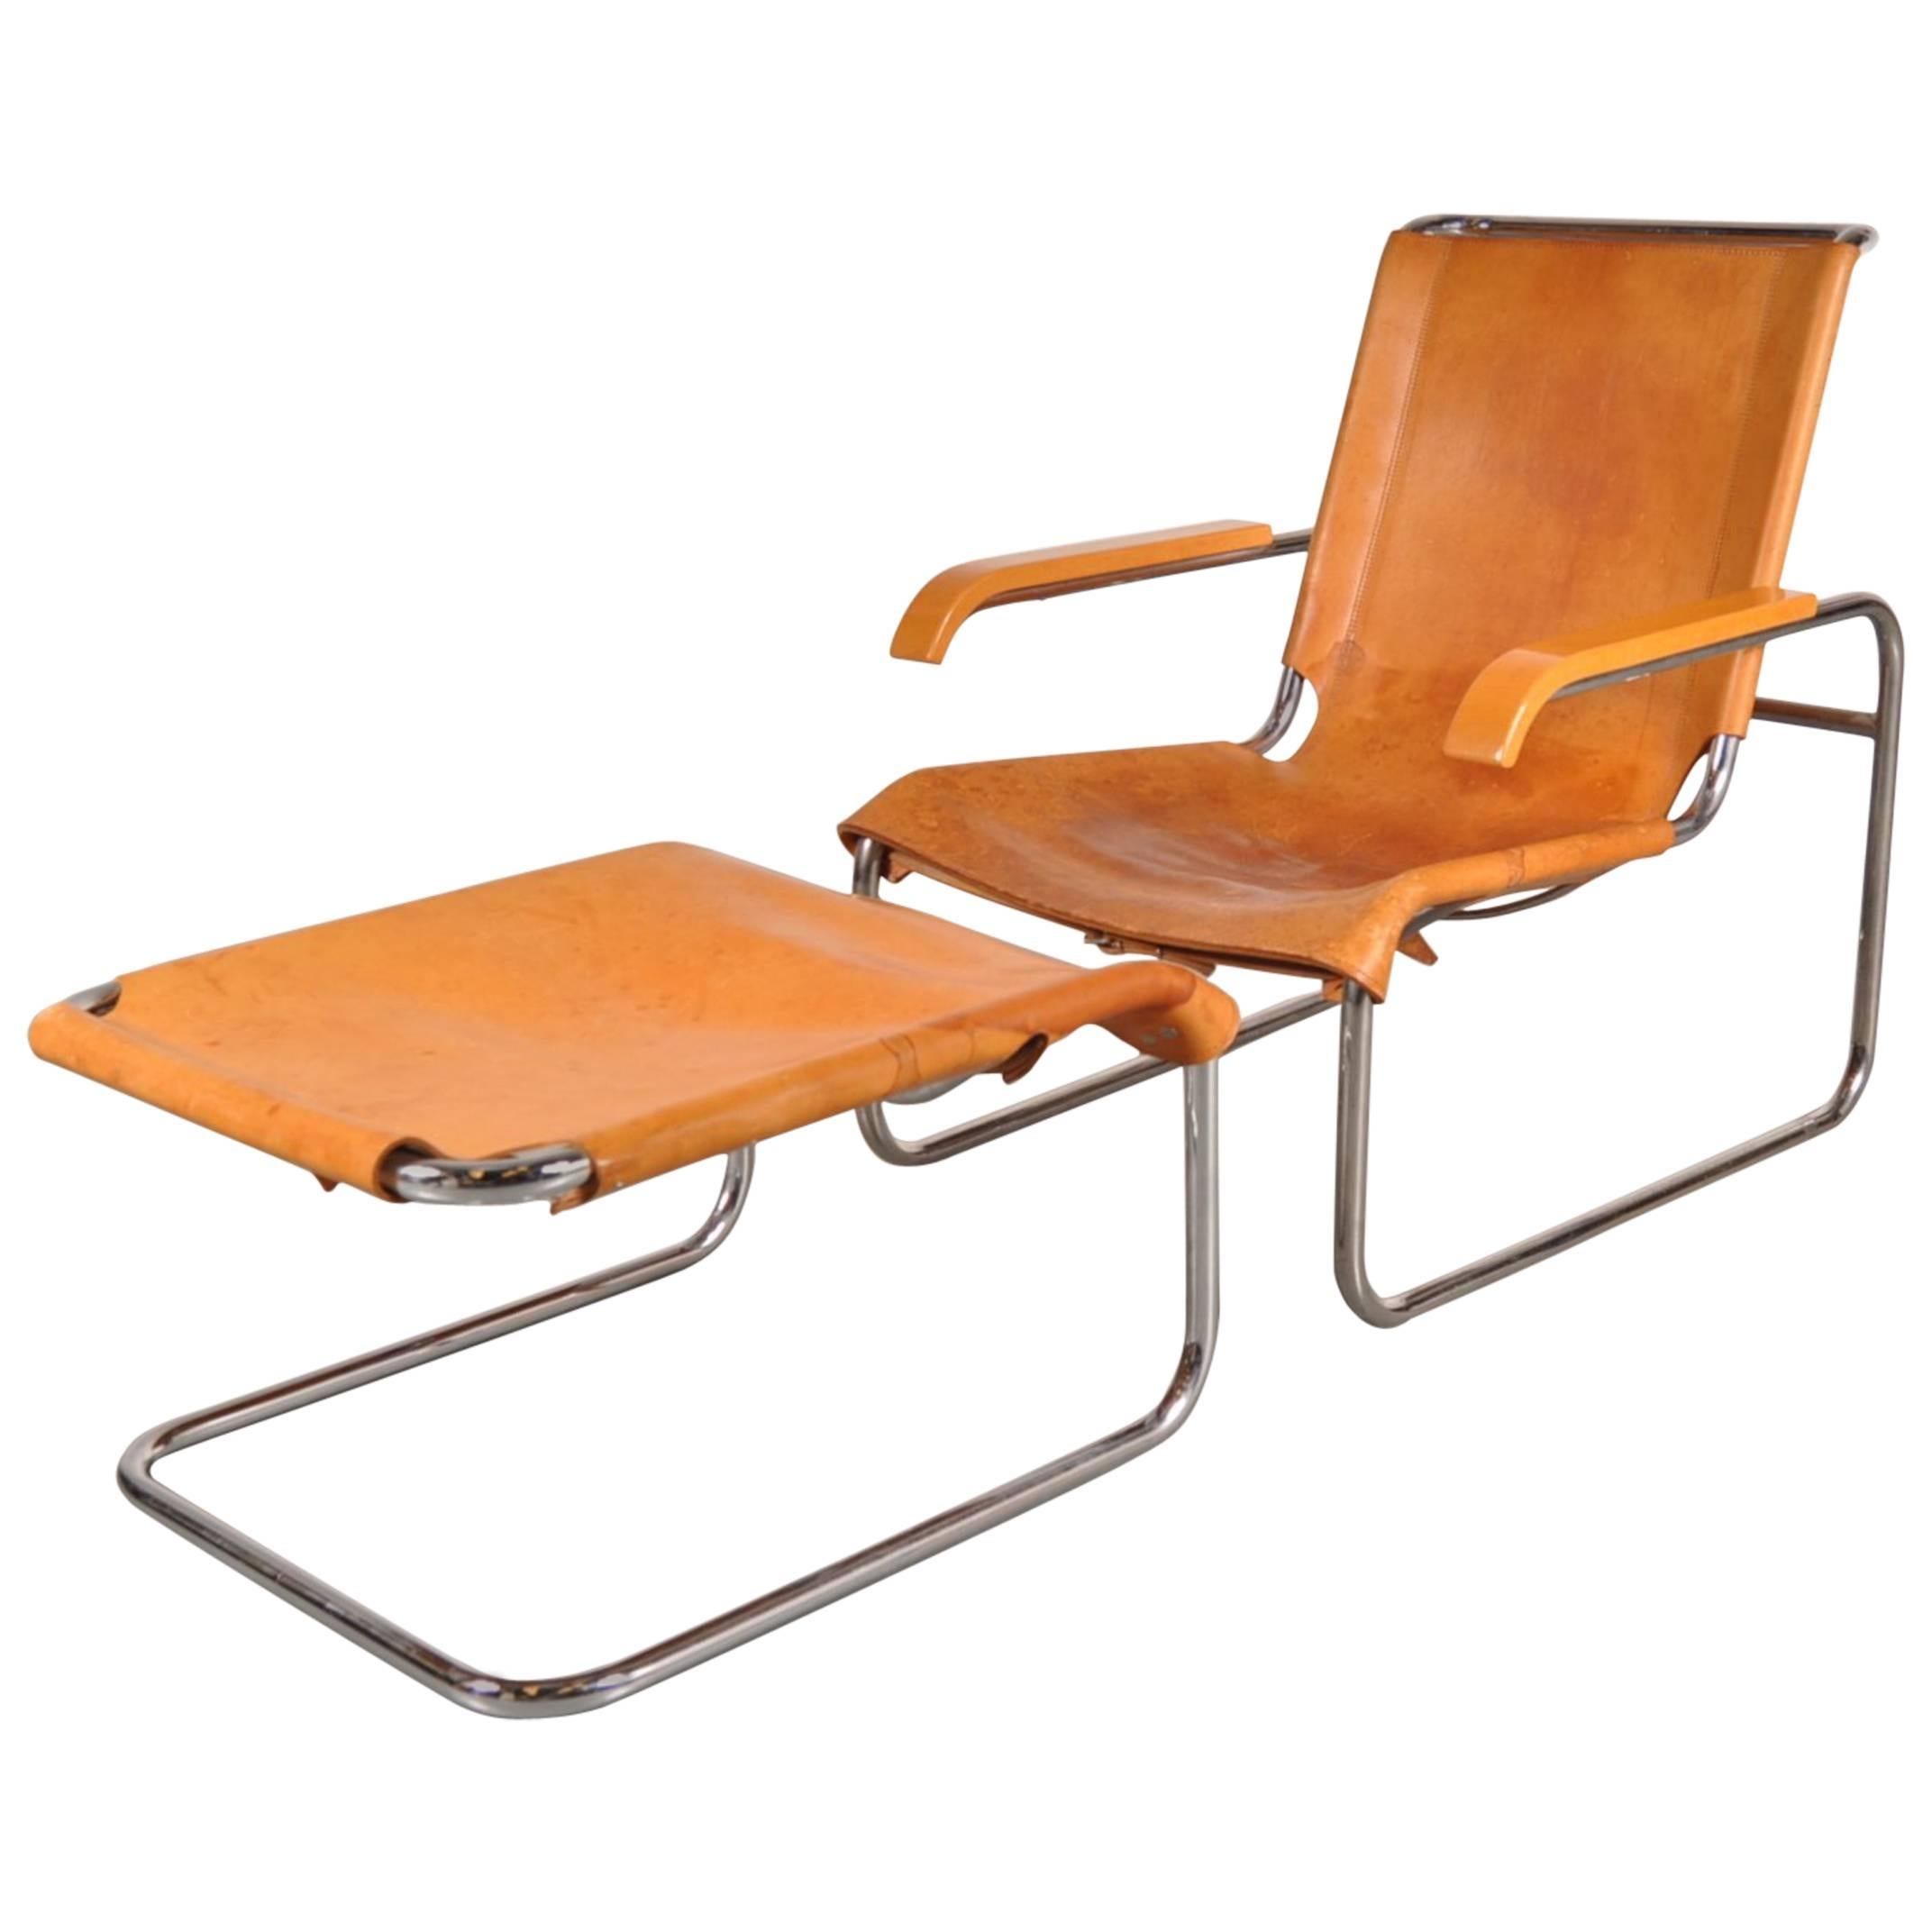 B35 Lounge Chair and Ottoman by Marcel Breuer for Thonet, Germany, 1920